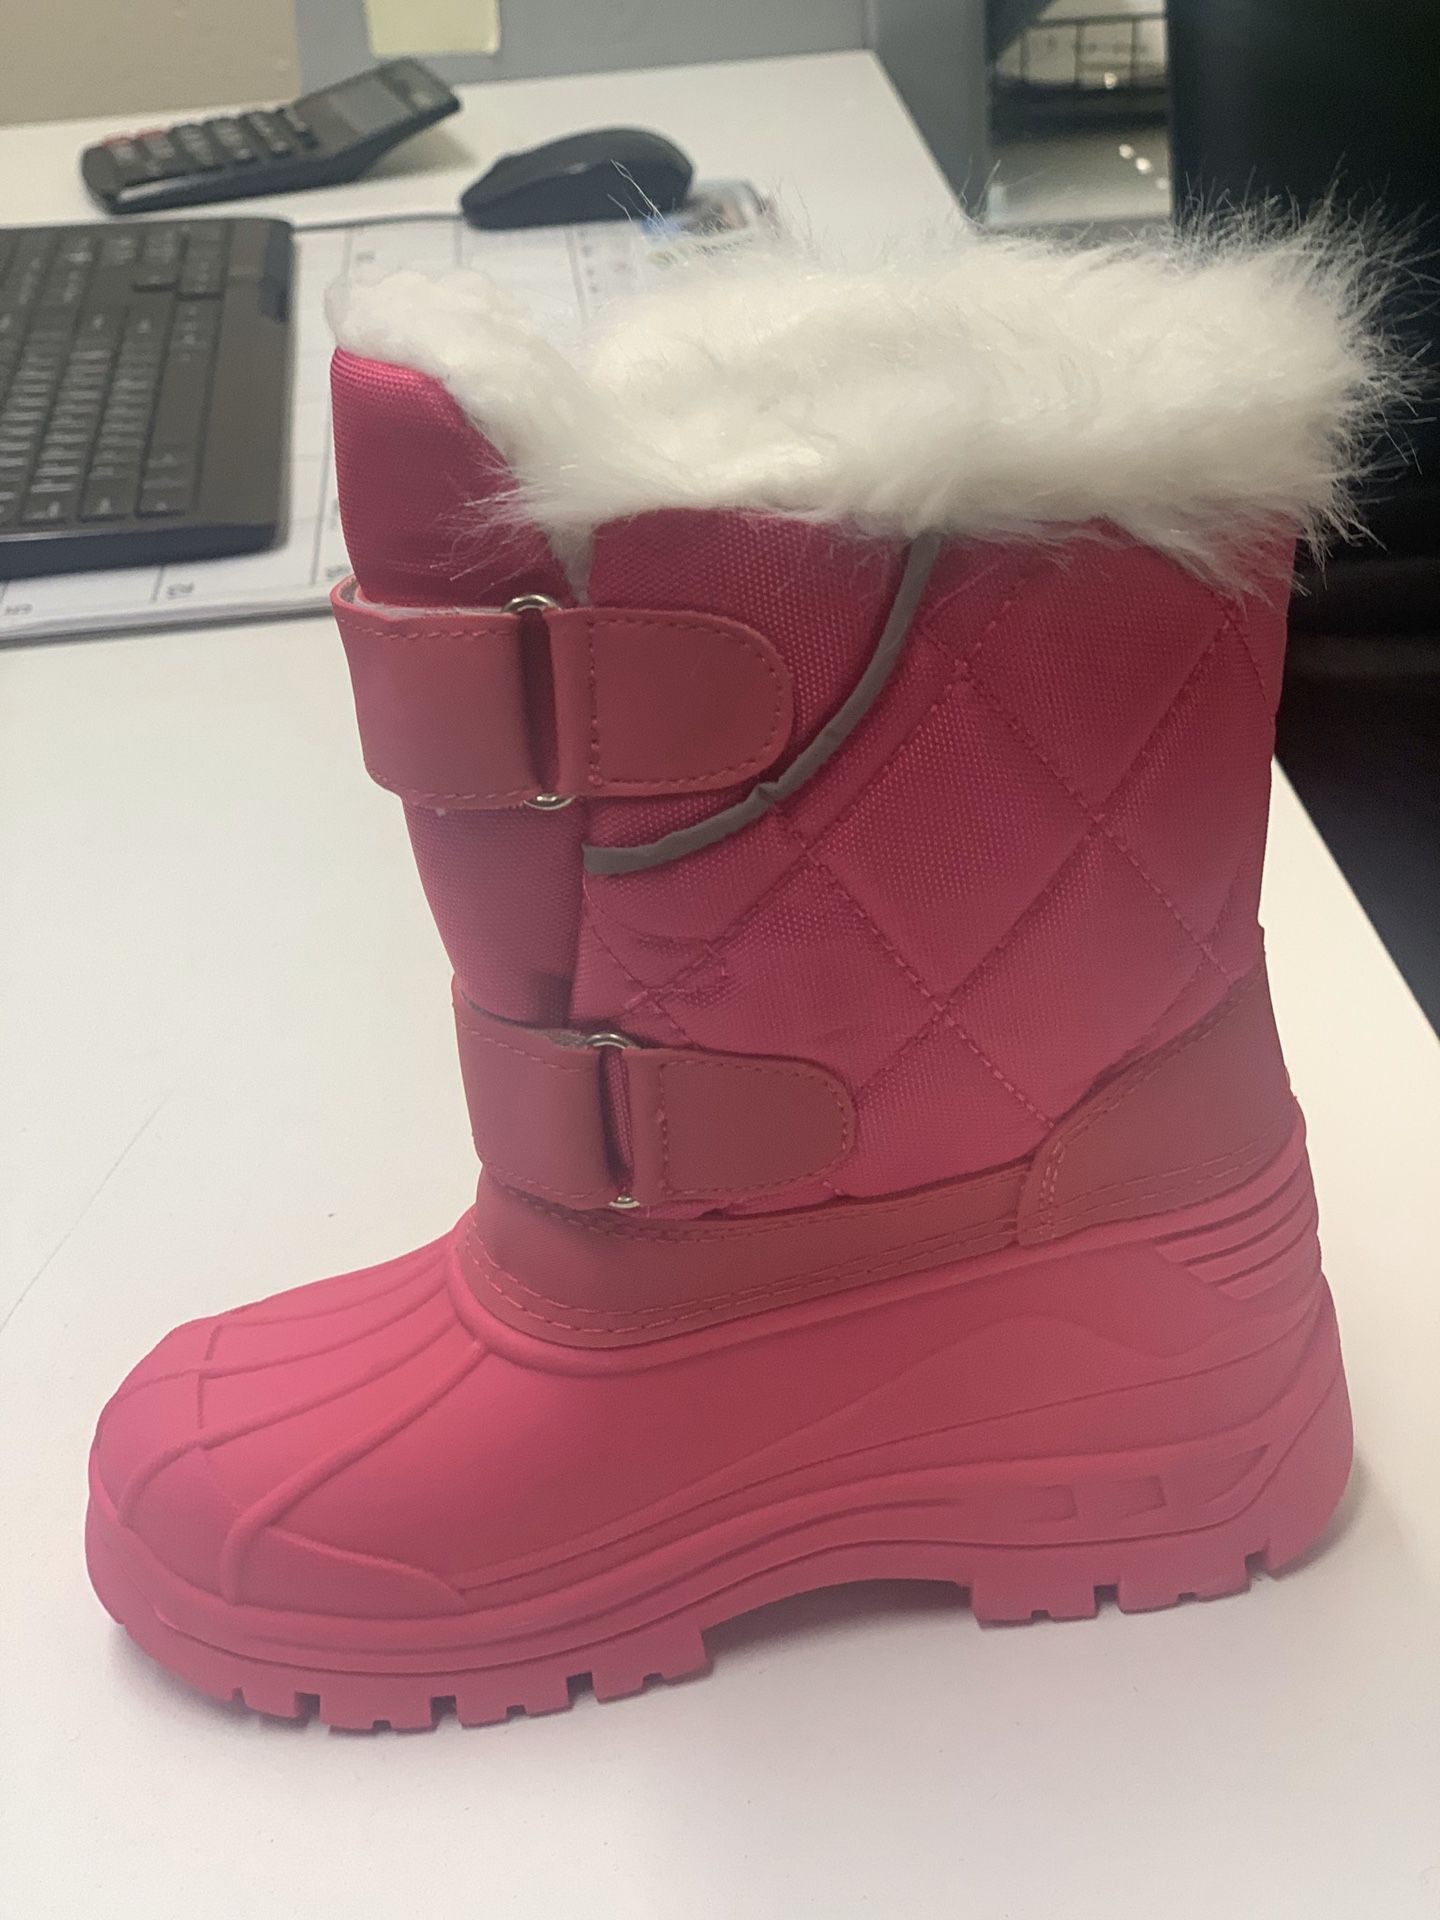 Snow boots for little girls size 7,8,9,10,11,12,13,1, kids